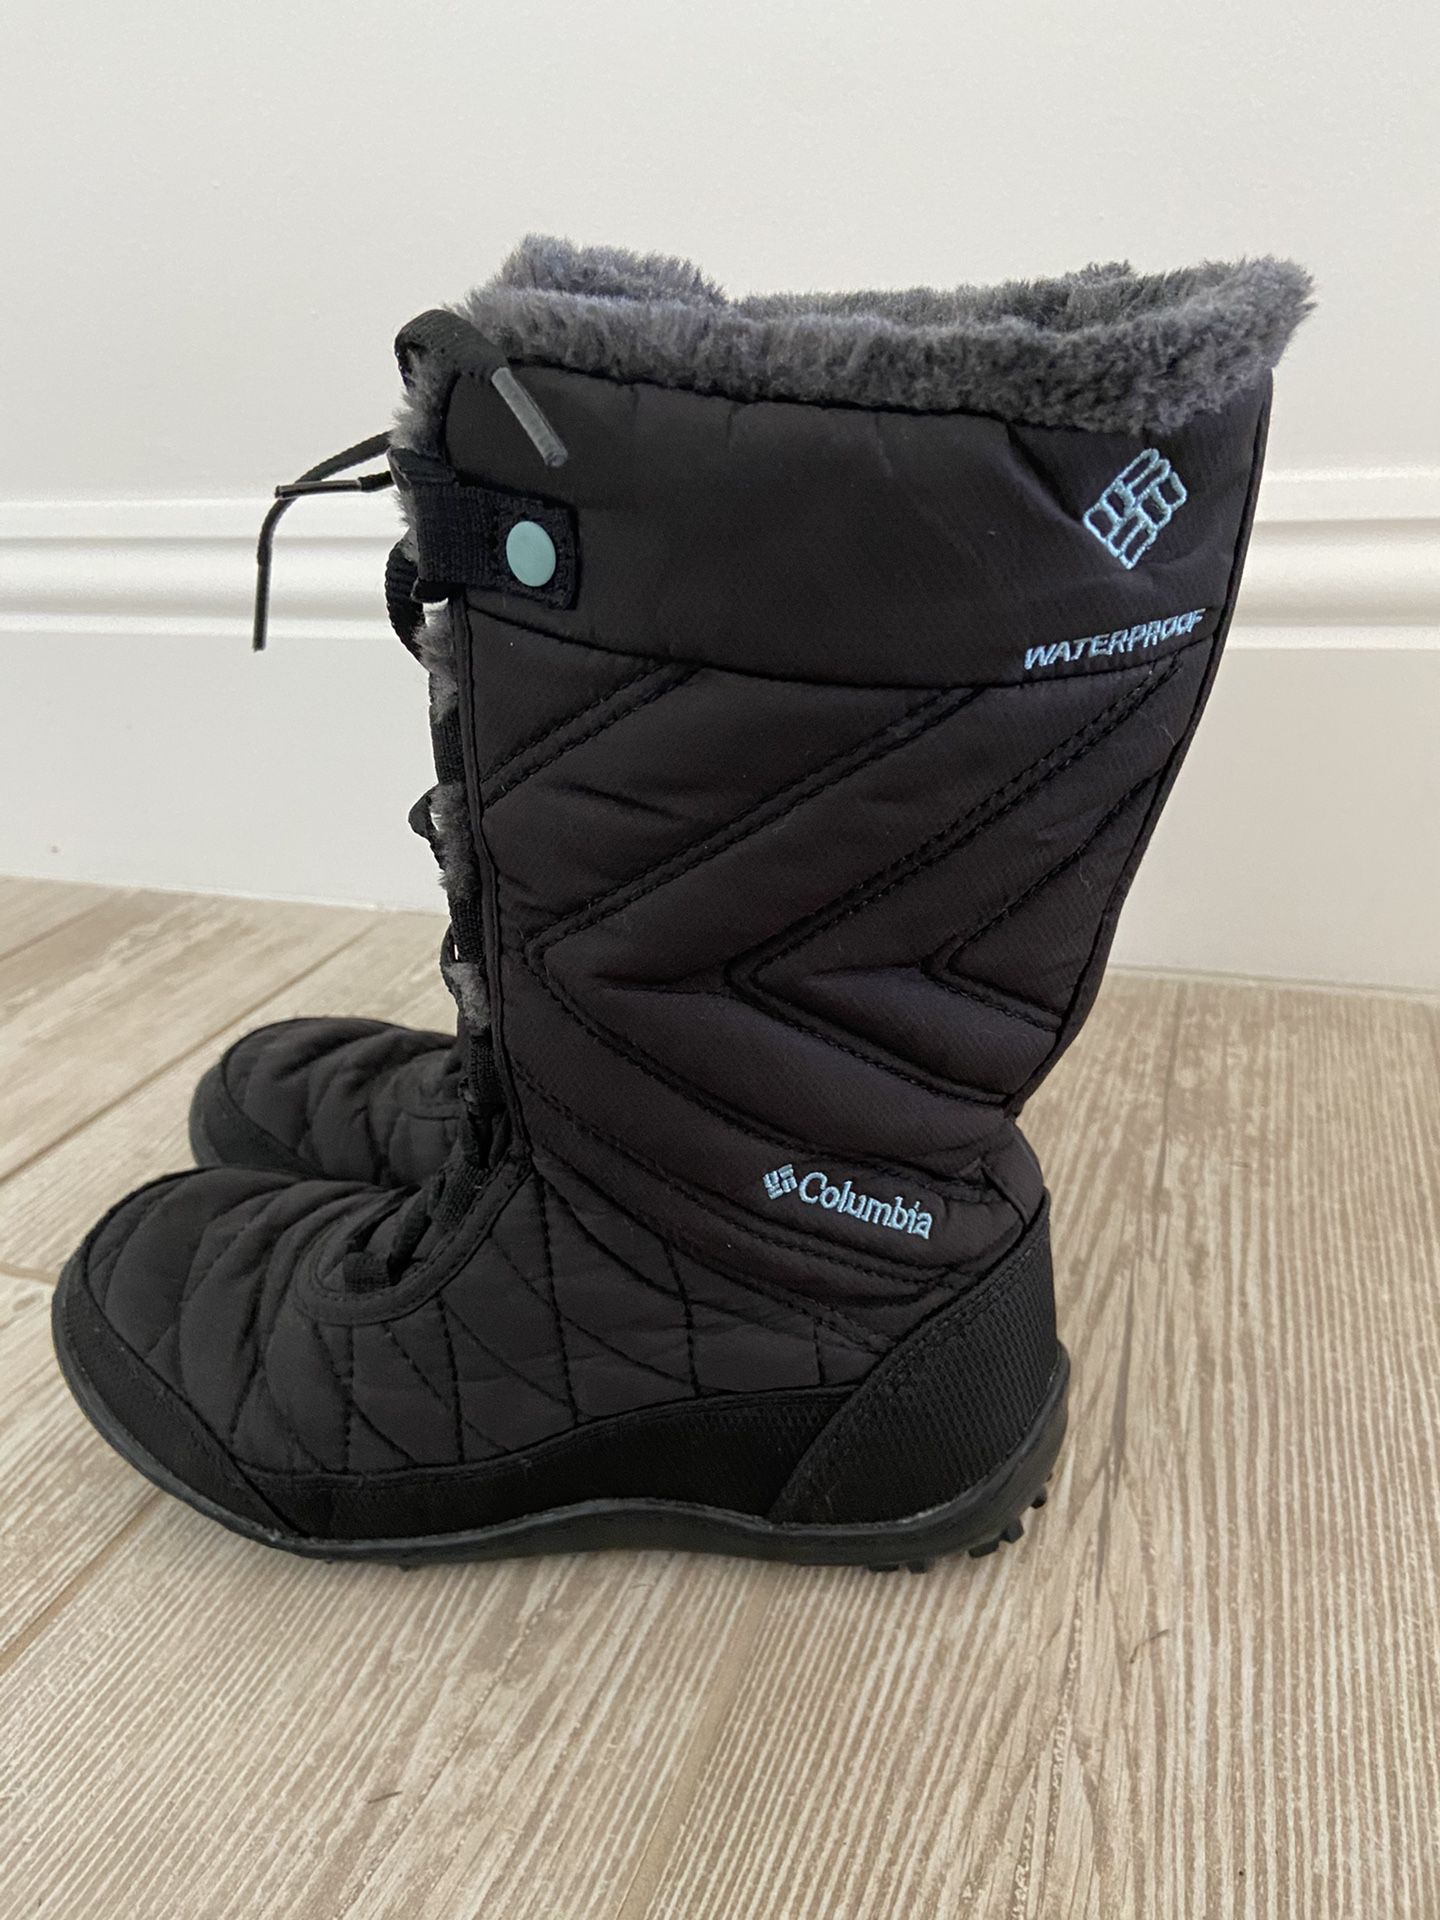 Brand New Columbia Boots for girls size 4